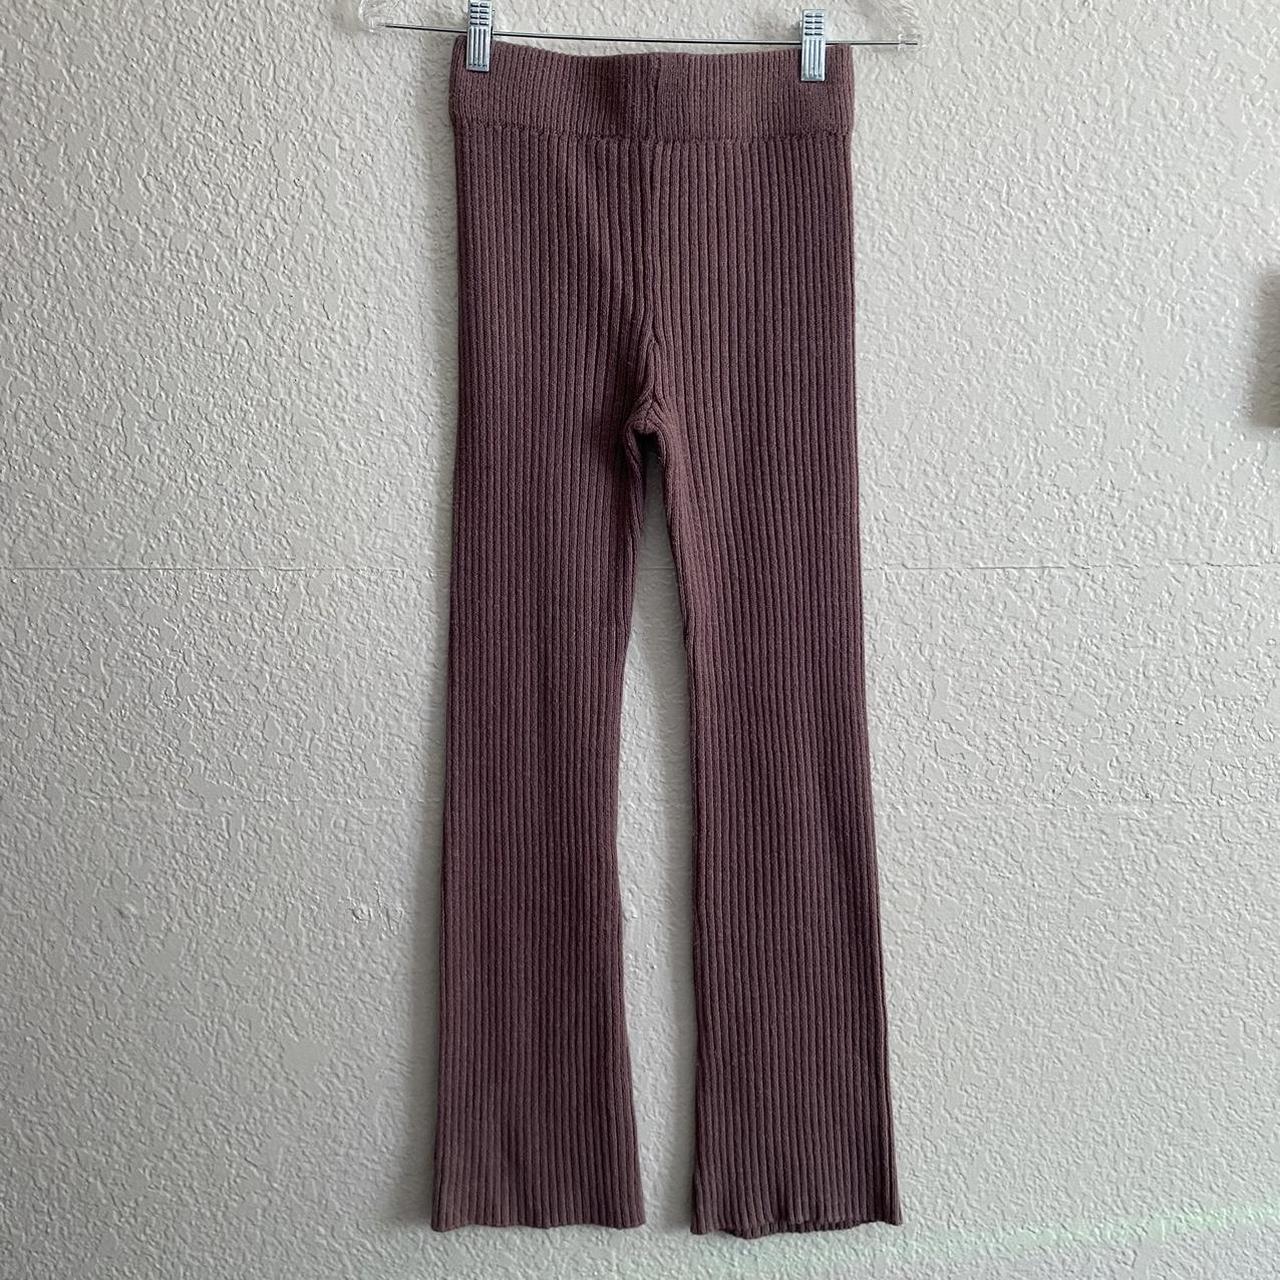 Wild fable ribbed flare leggings Super cozy and - Depop